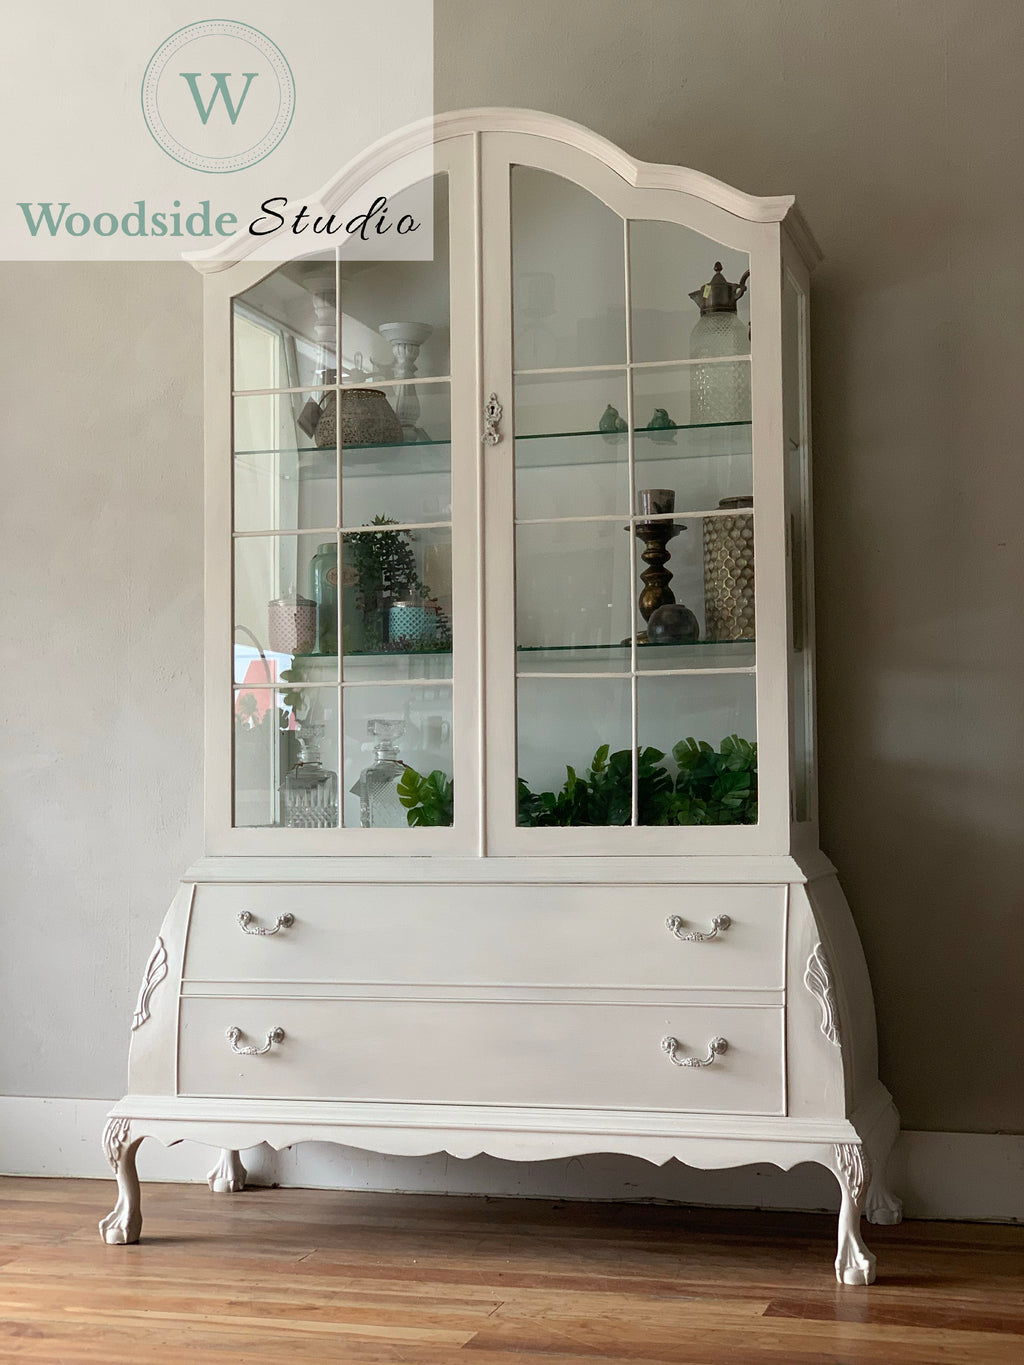 French Provincial Style China Cabinet